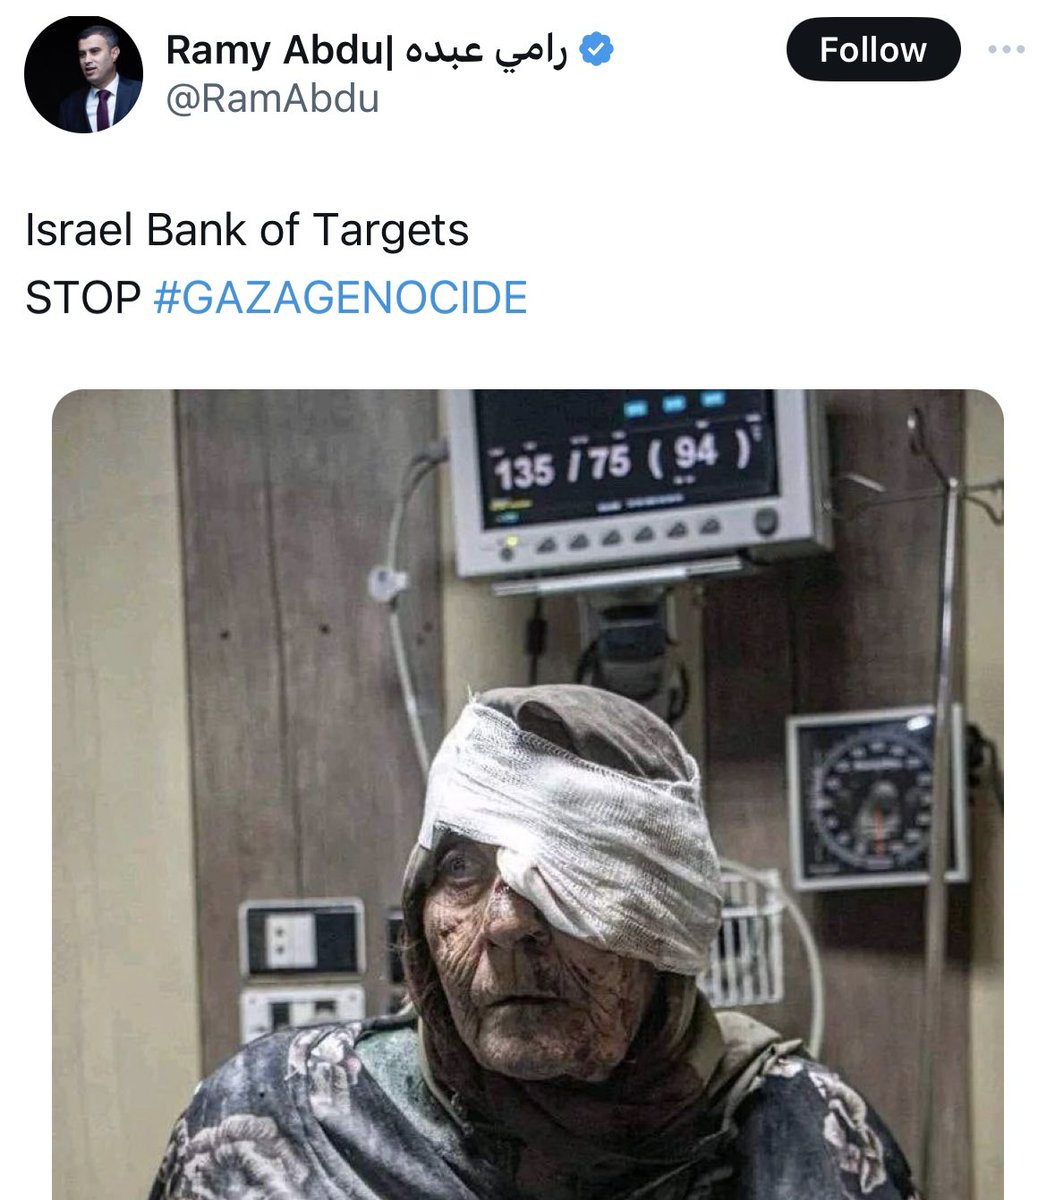 This is a SYRIAN woman bombed by ASSAD just weeks ago. Ramy Abdu is the Chairman of Euro-Med Monitor. Extremely irresponsible to misattribute this image.